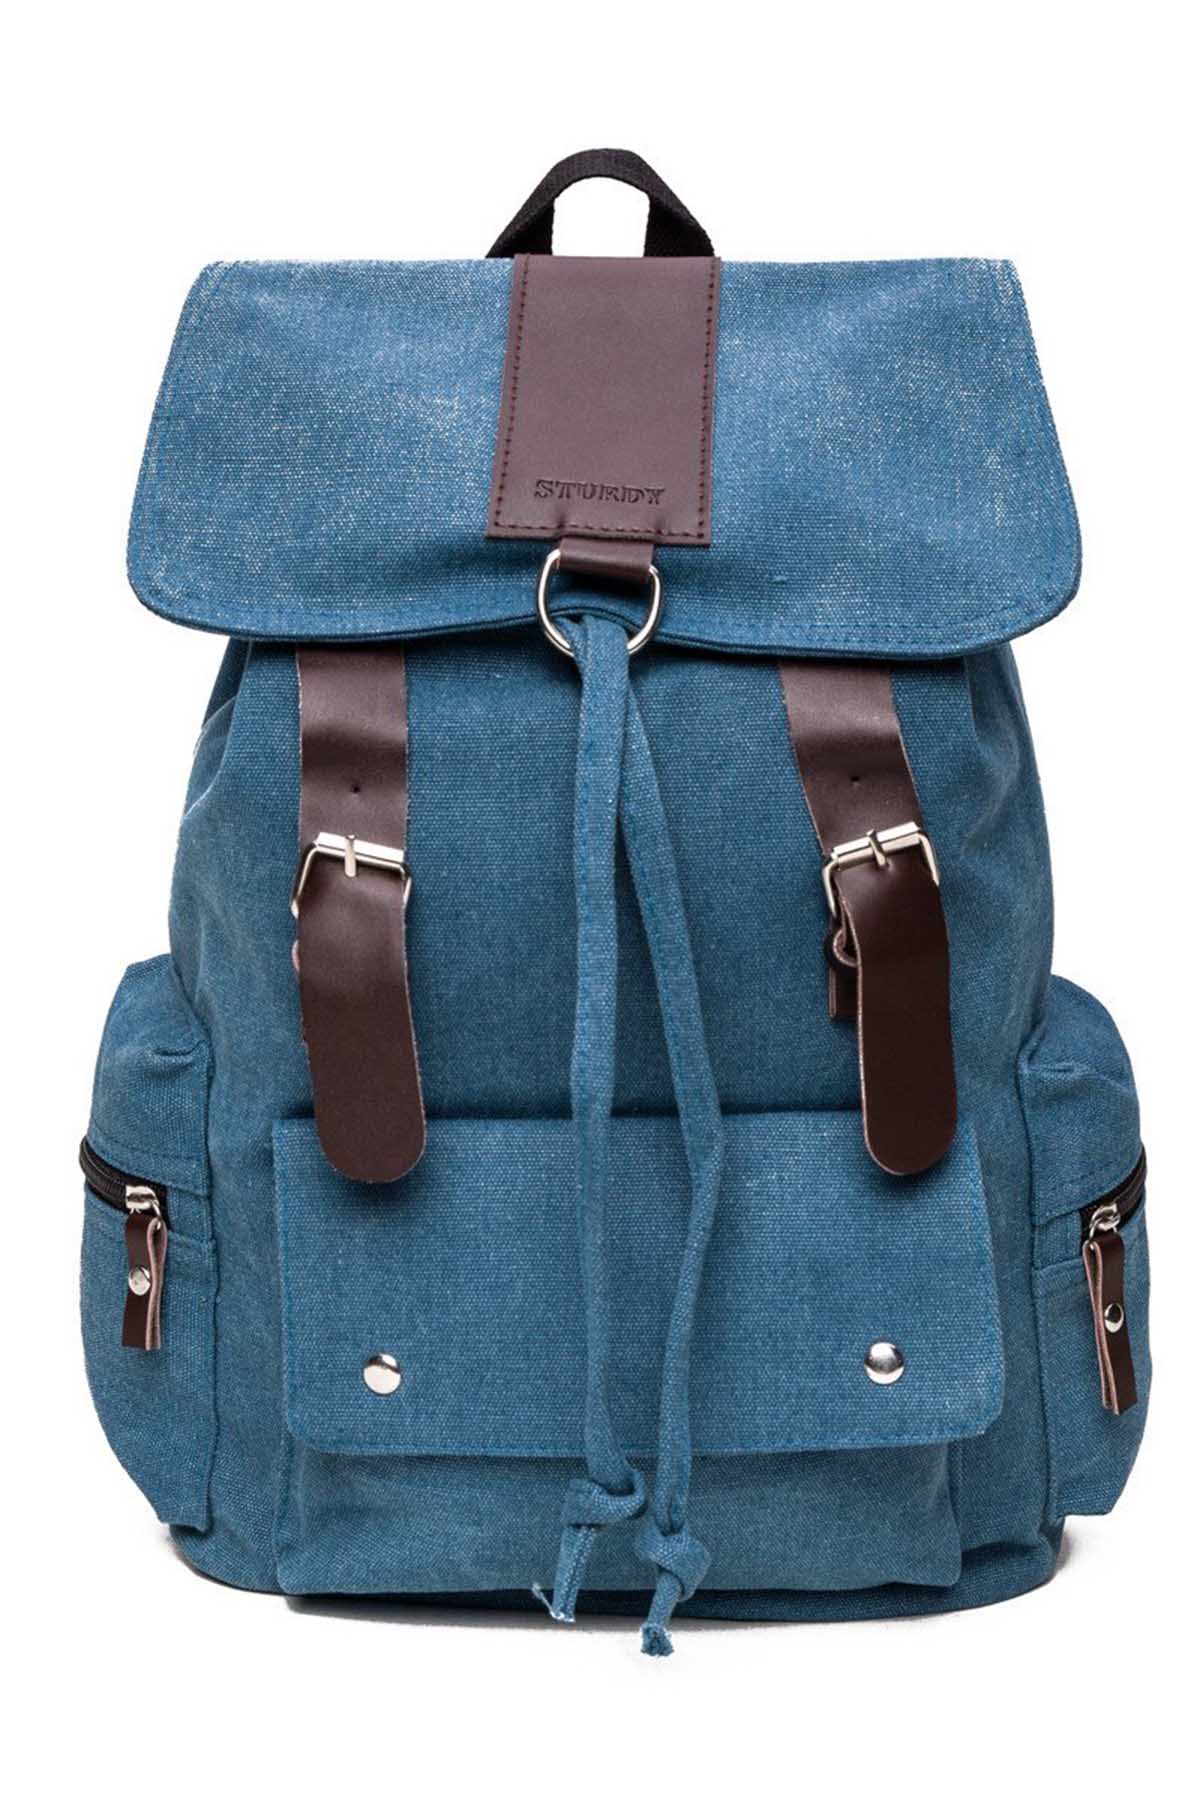 Something Strong Blue Rocksmith Flapover Backpack